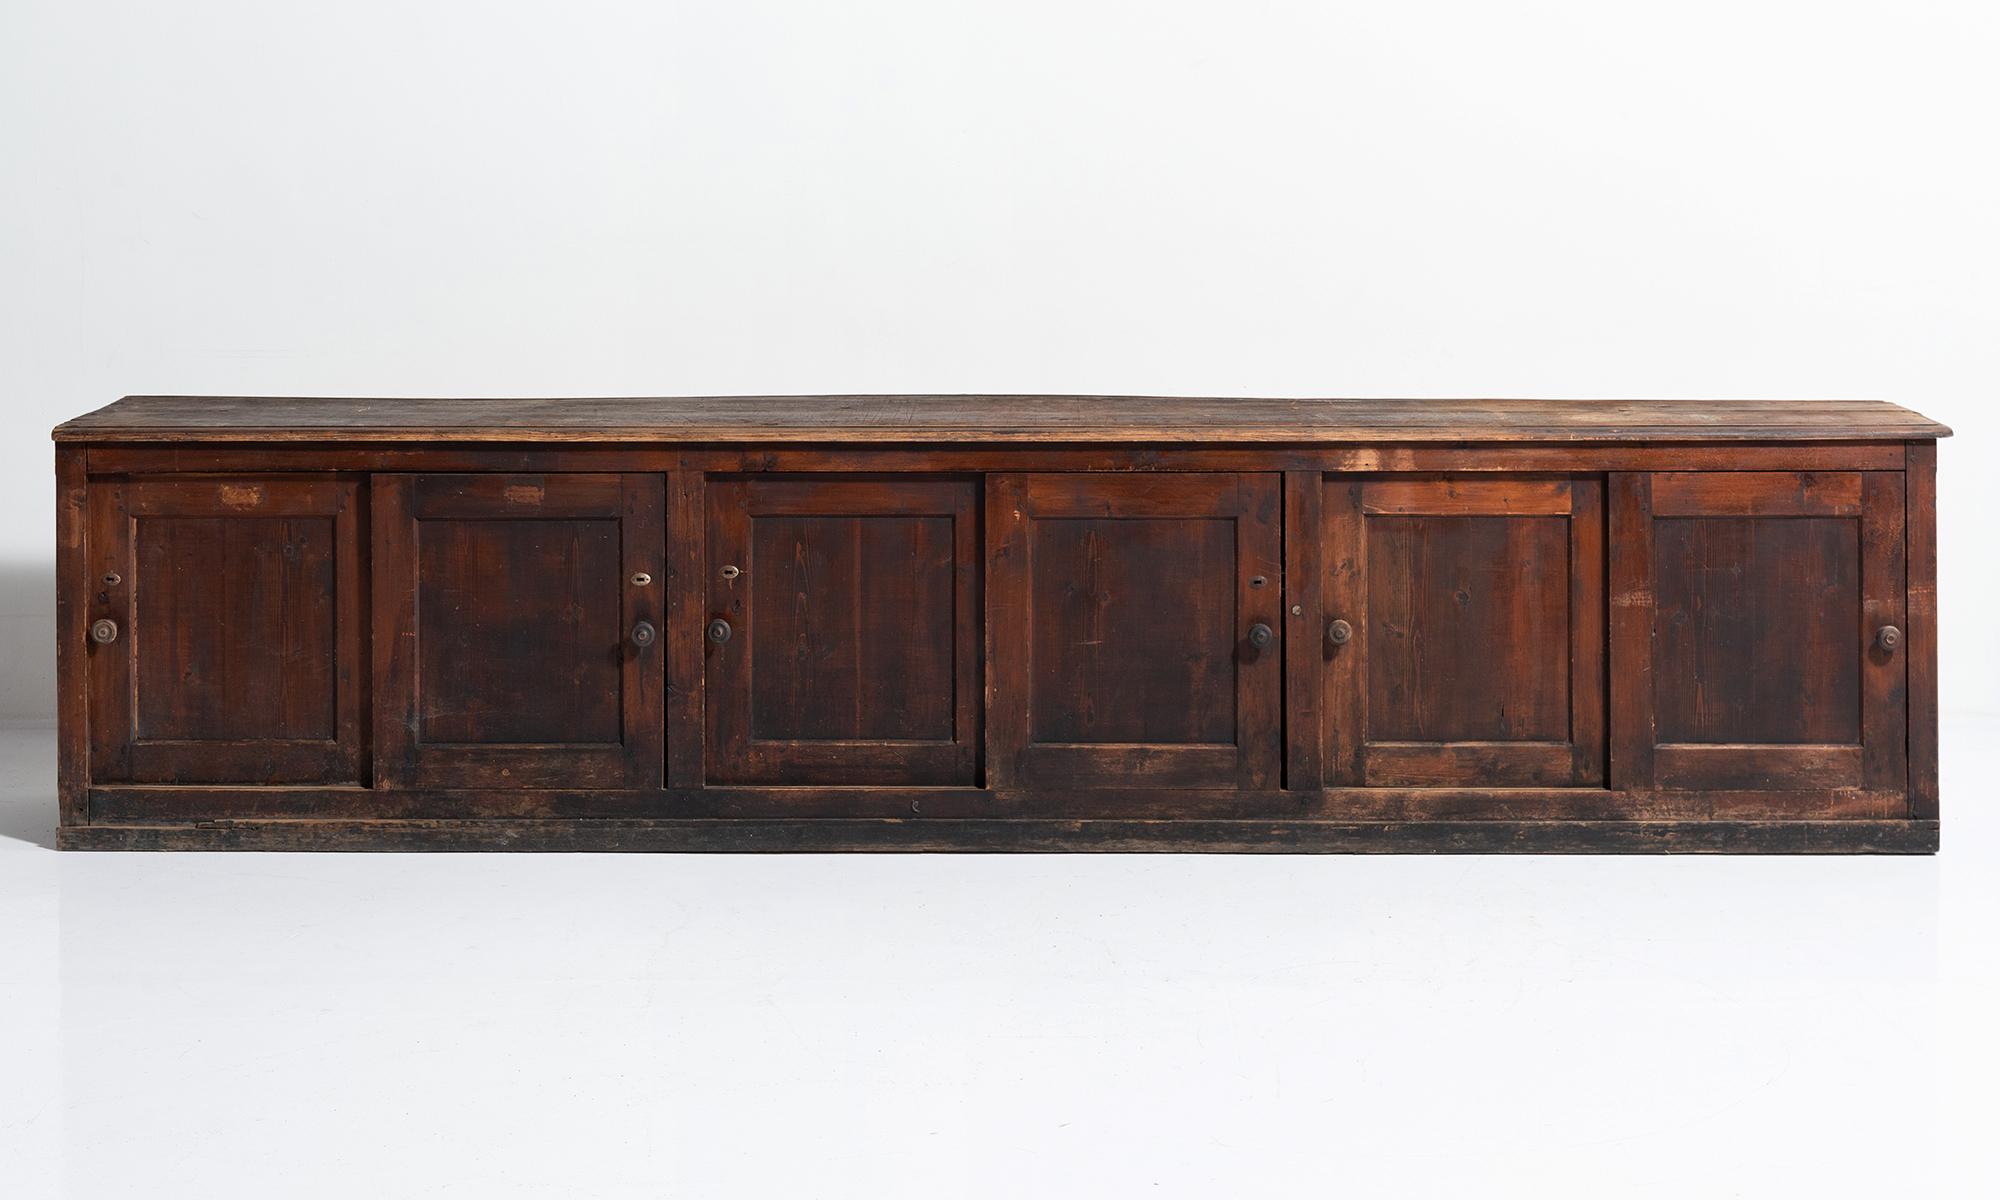 Primitive Sideboard, Italy 1900.

Massive pine storage cabinet, originally from a workshop.